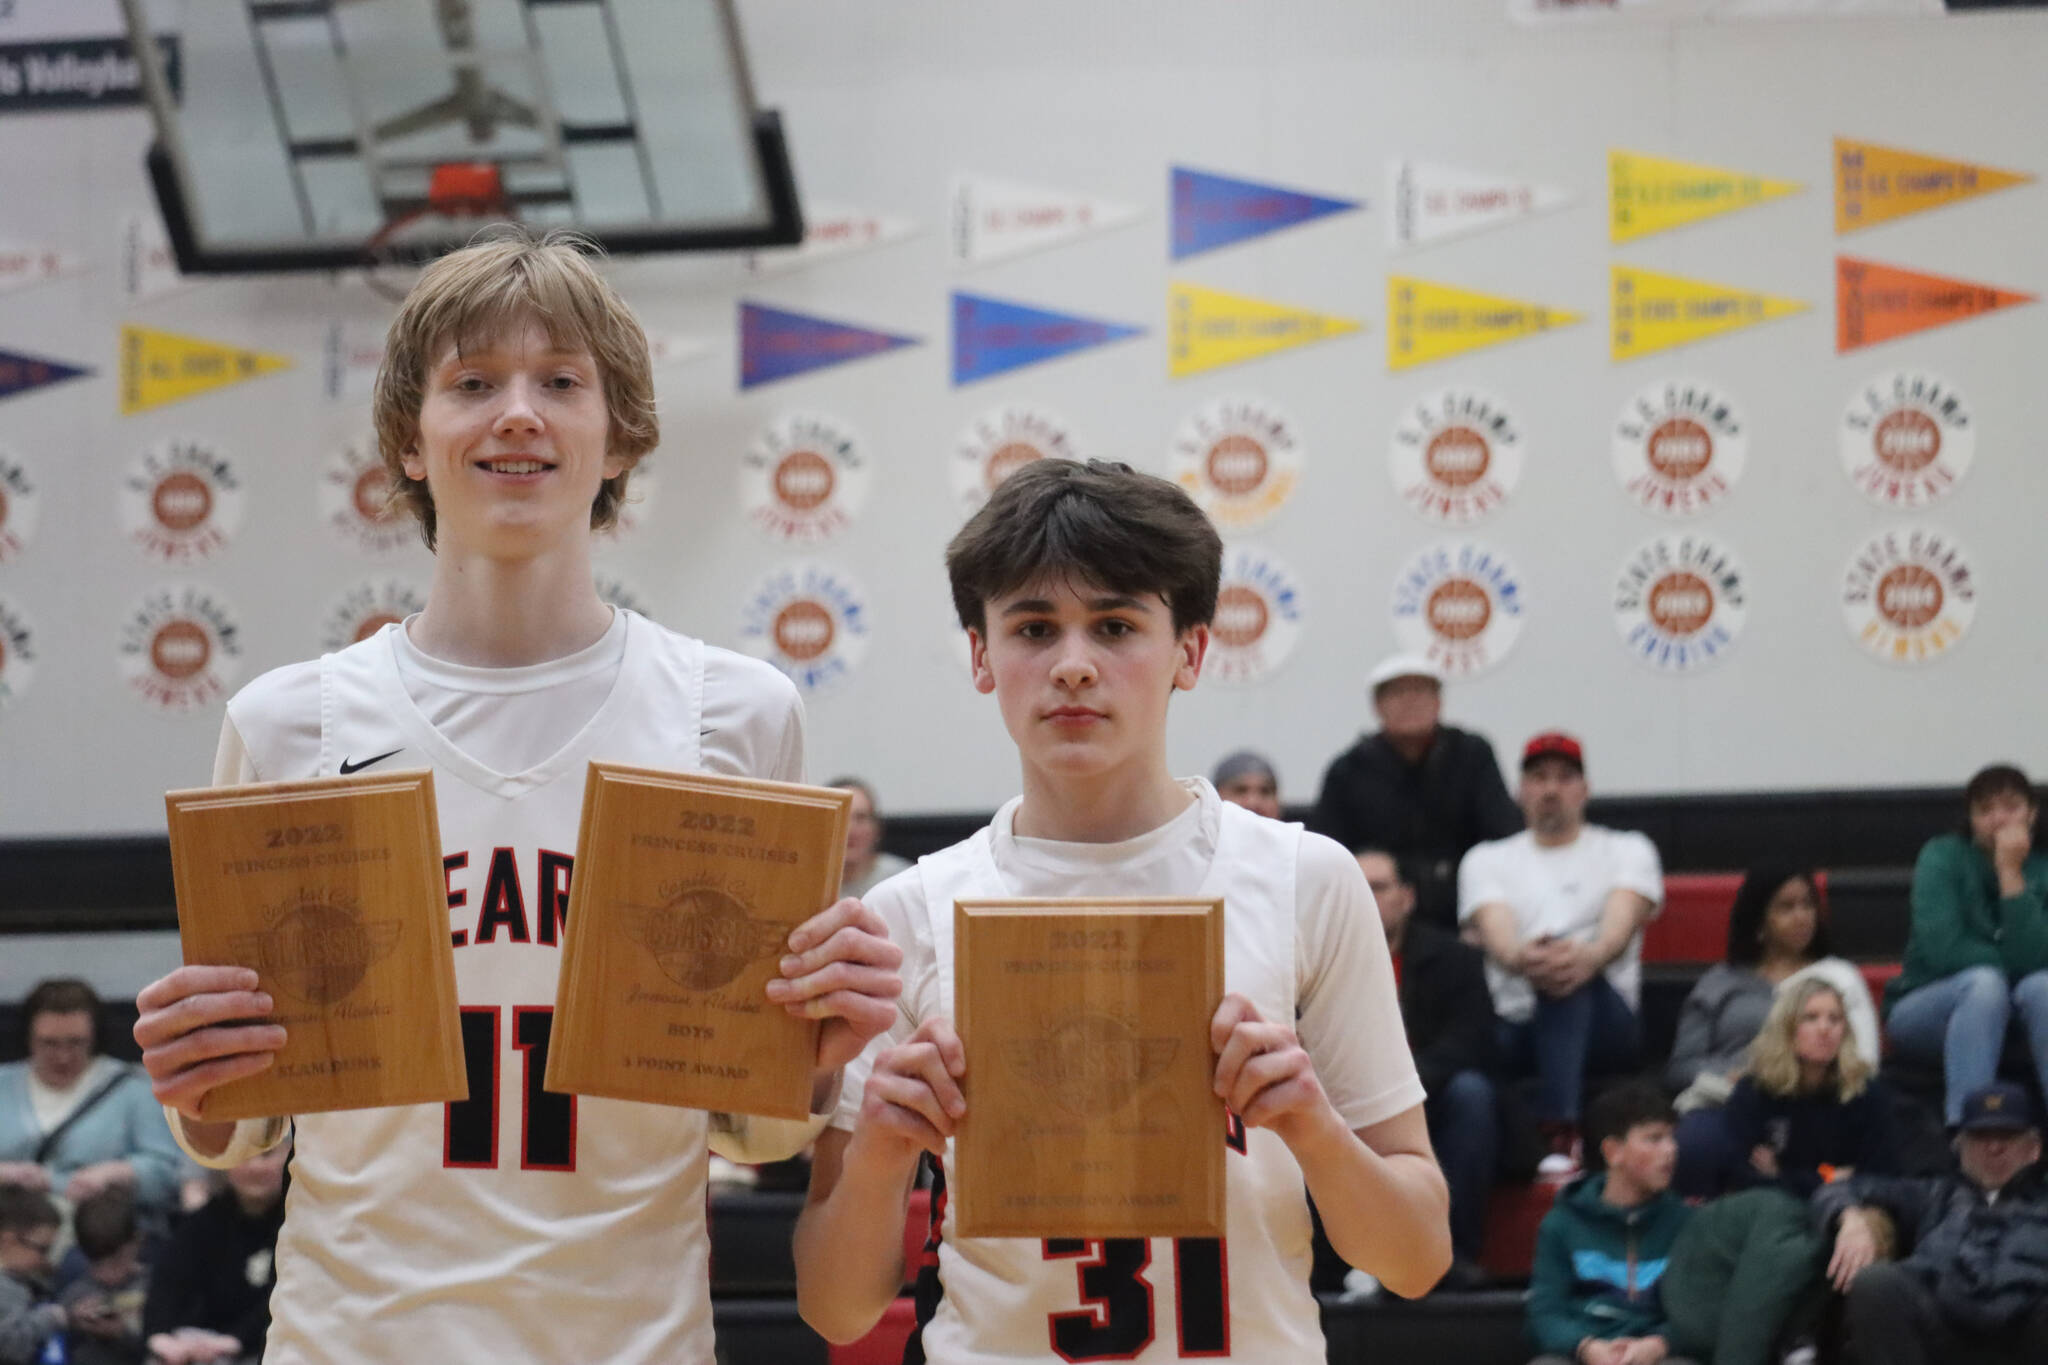 JDHS junior Sean Oliver and freshman Brandon Casperson each took honors during the Capital City Classic awards ceremony. Oliver won for both 3-point shooting and the dunk contest while Casperson won for the boys free throw contest. (Jonson Kuhn / Juneau Empire)